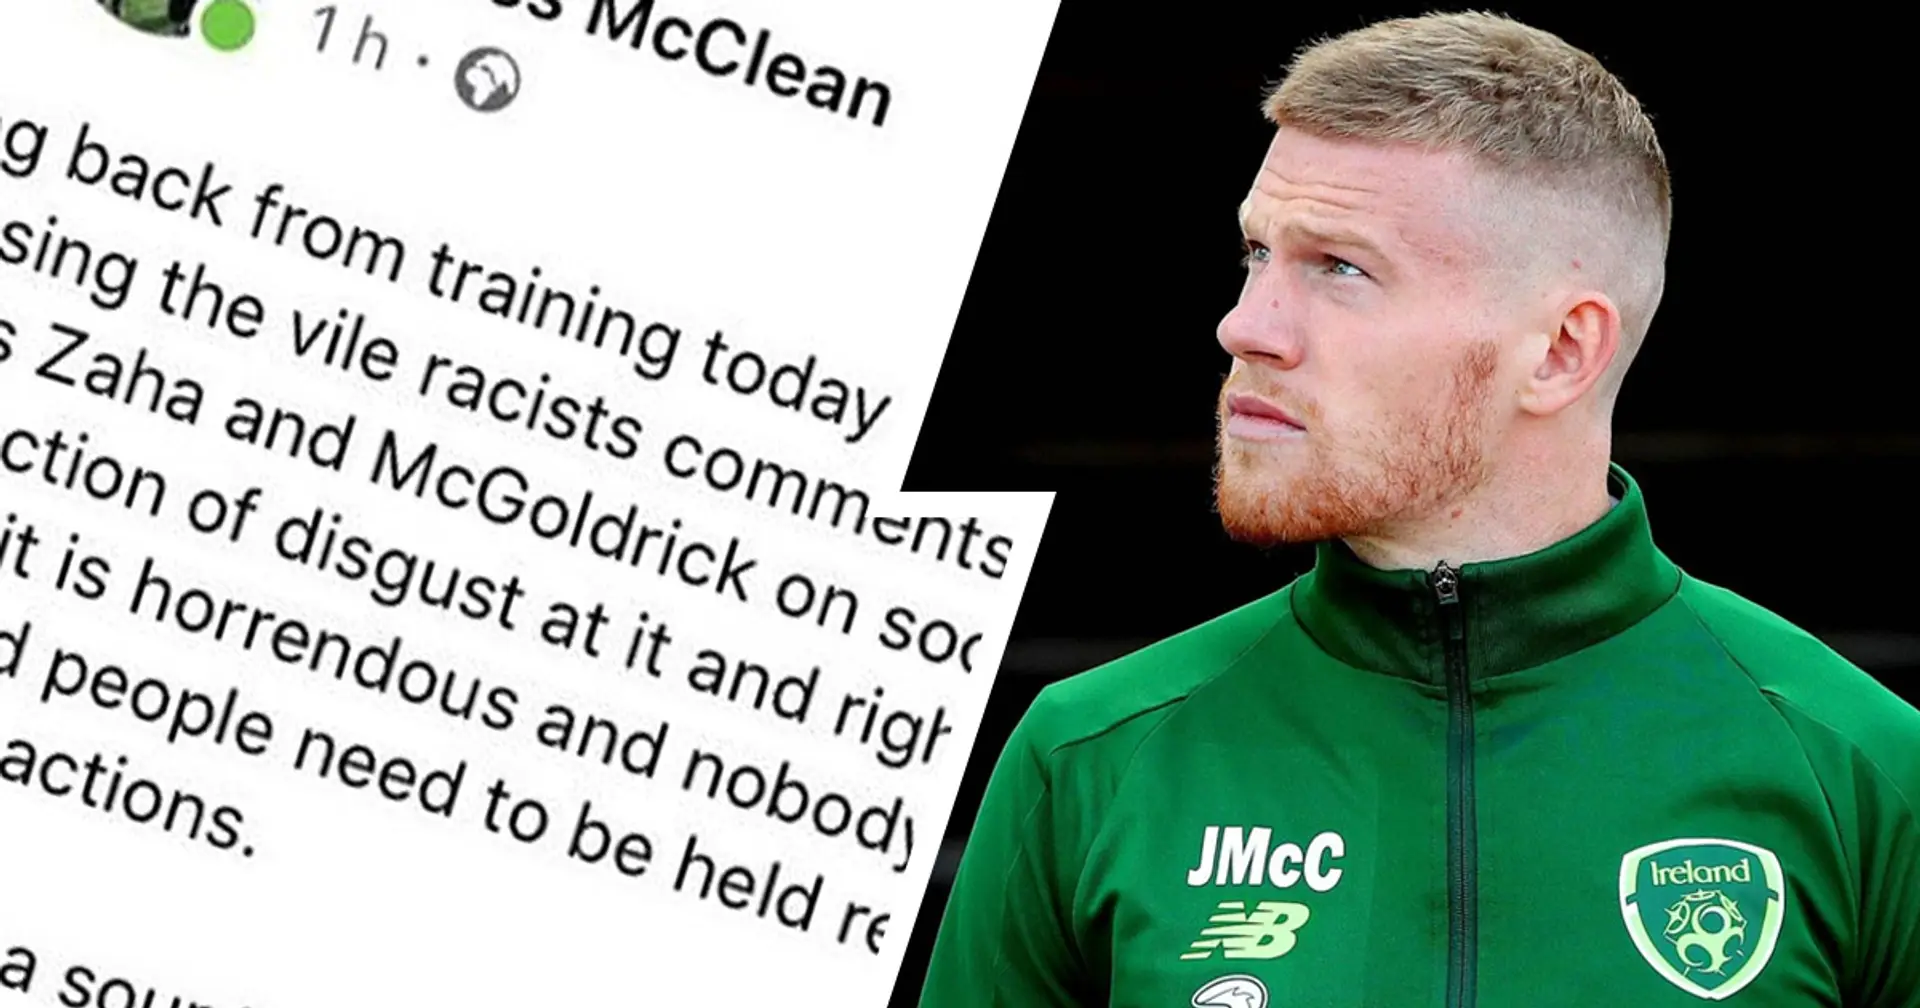 James McClean slams media for double standards after racist incidents: 'I receive and have received more abuse than any other player'